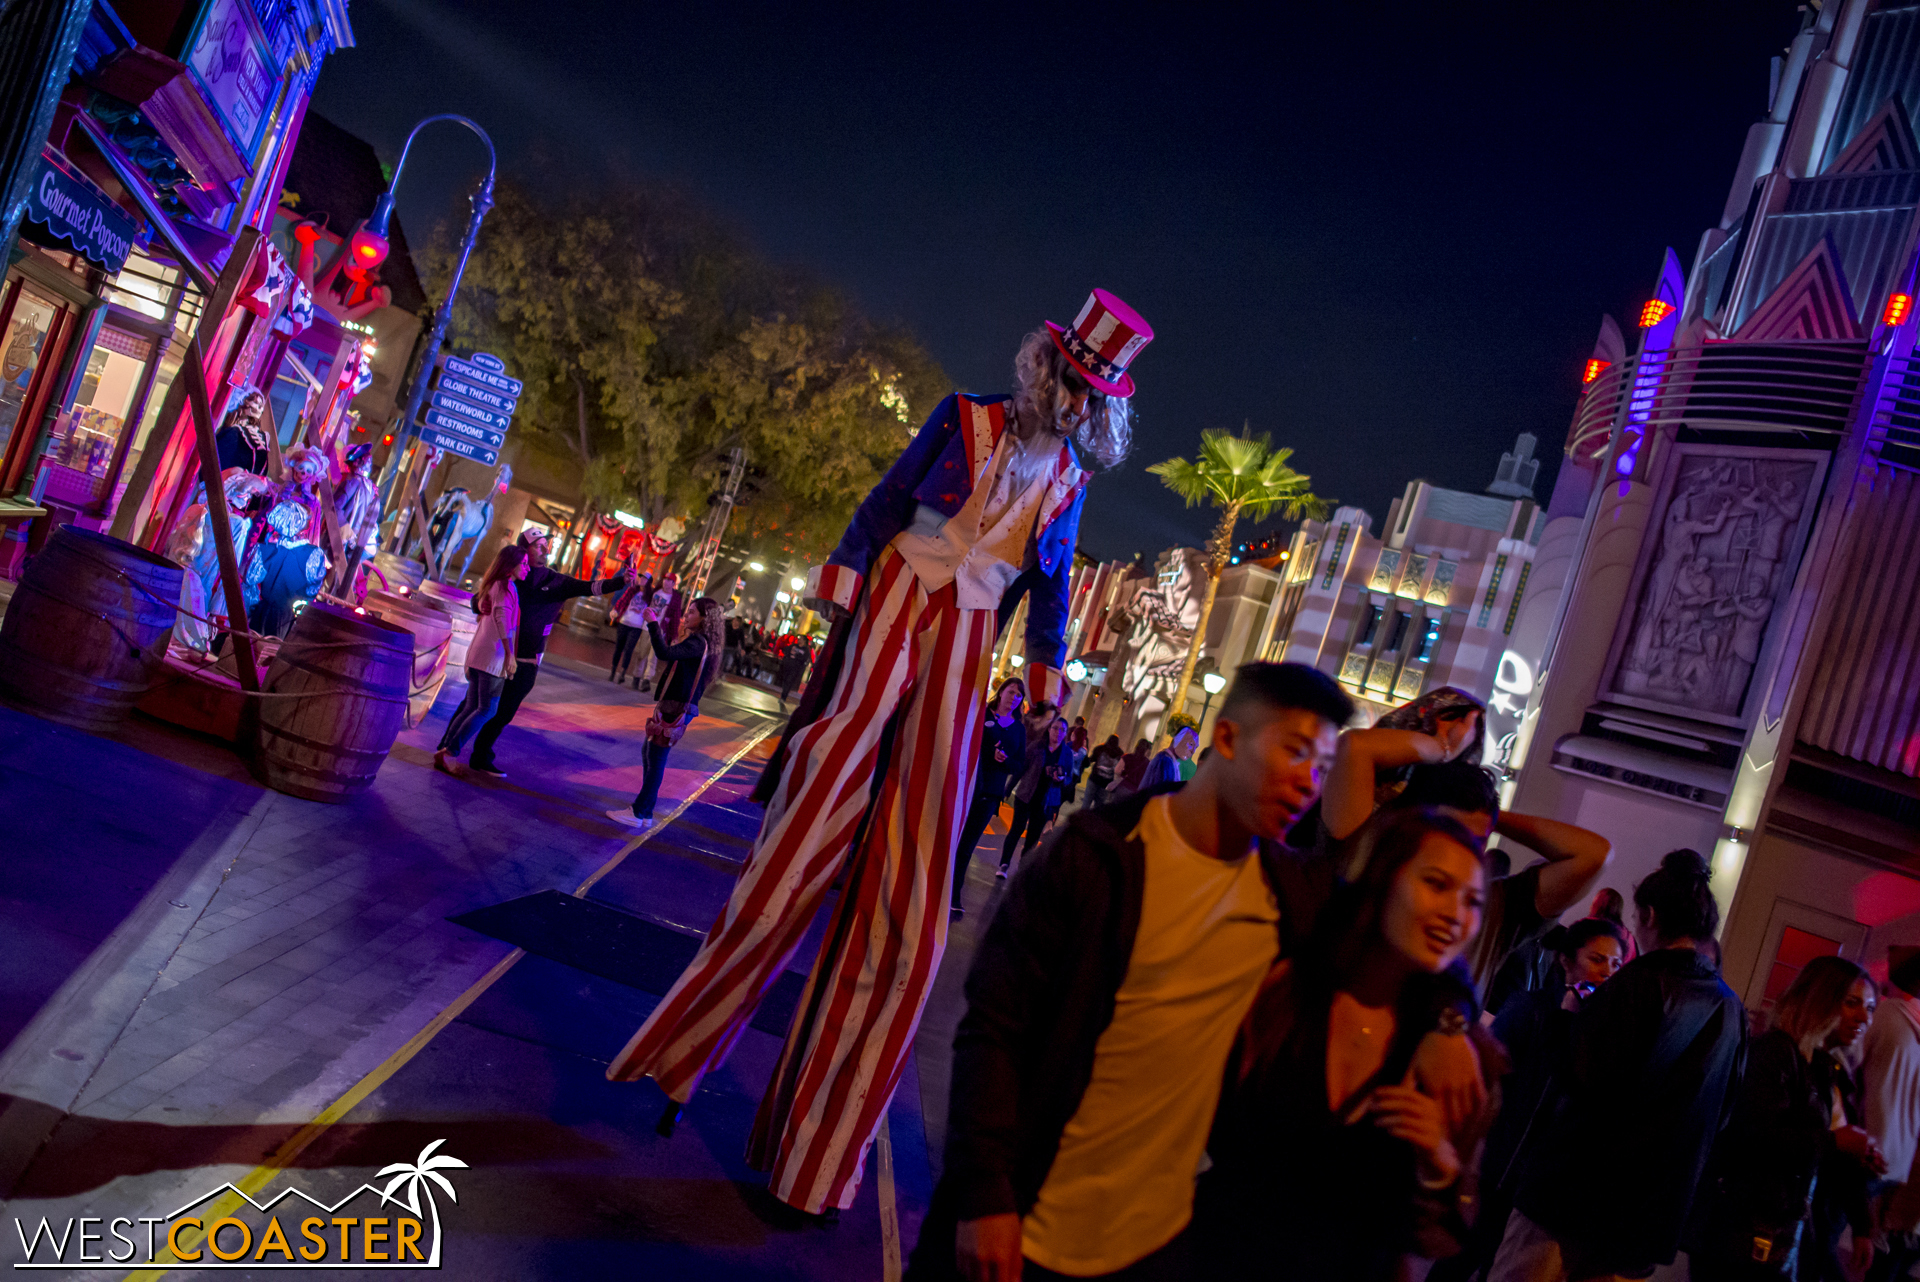  Uncle Sam is one of two stilt walkers in the area.&nbsp; And I'll say that at Universal, the stilt walkers bring tremendous skill and scares every year. 